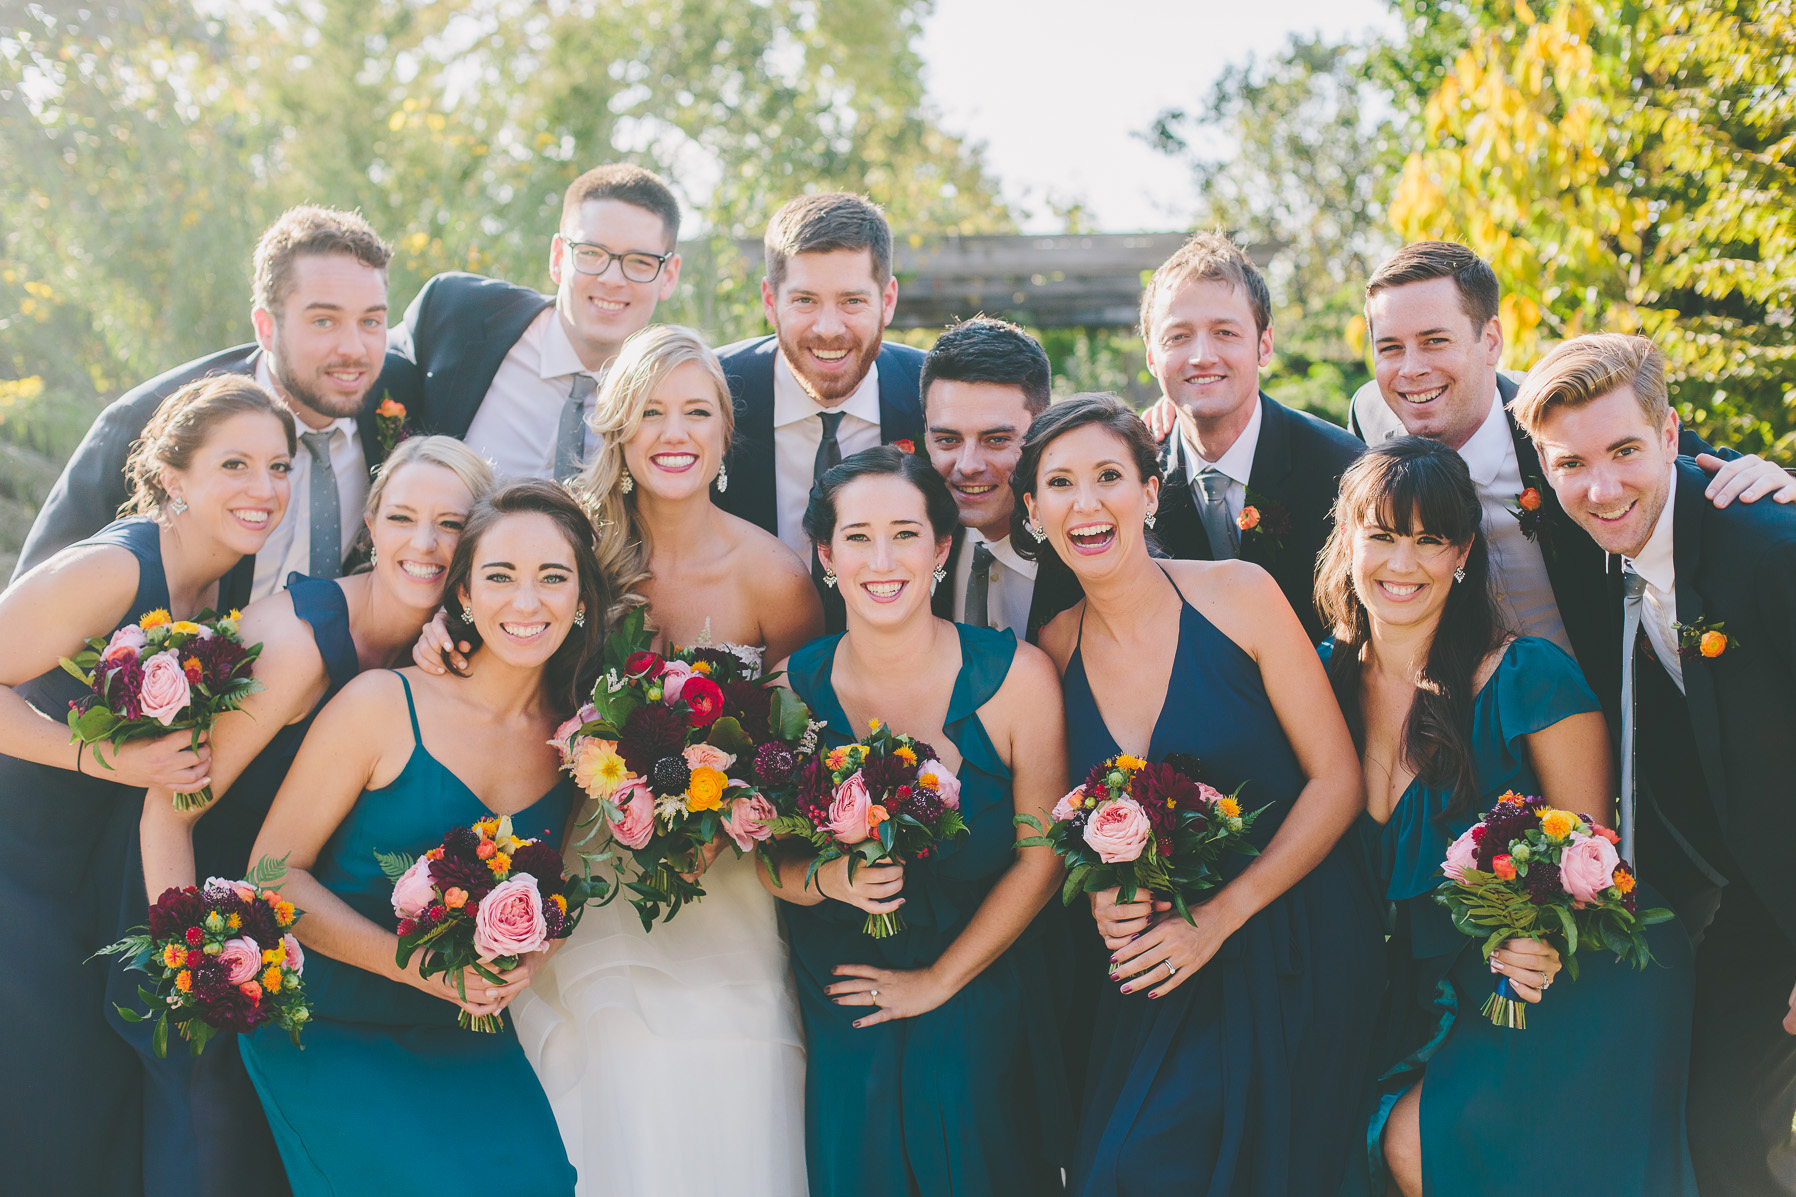 Fall wedding party outside with teal dresses, orange ranunculus boutonnières, and bouquet with red, pink, plum, and bright yellow.